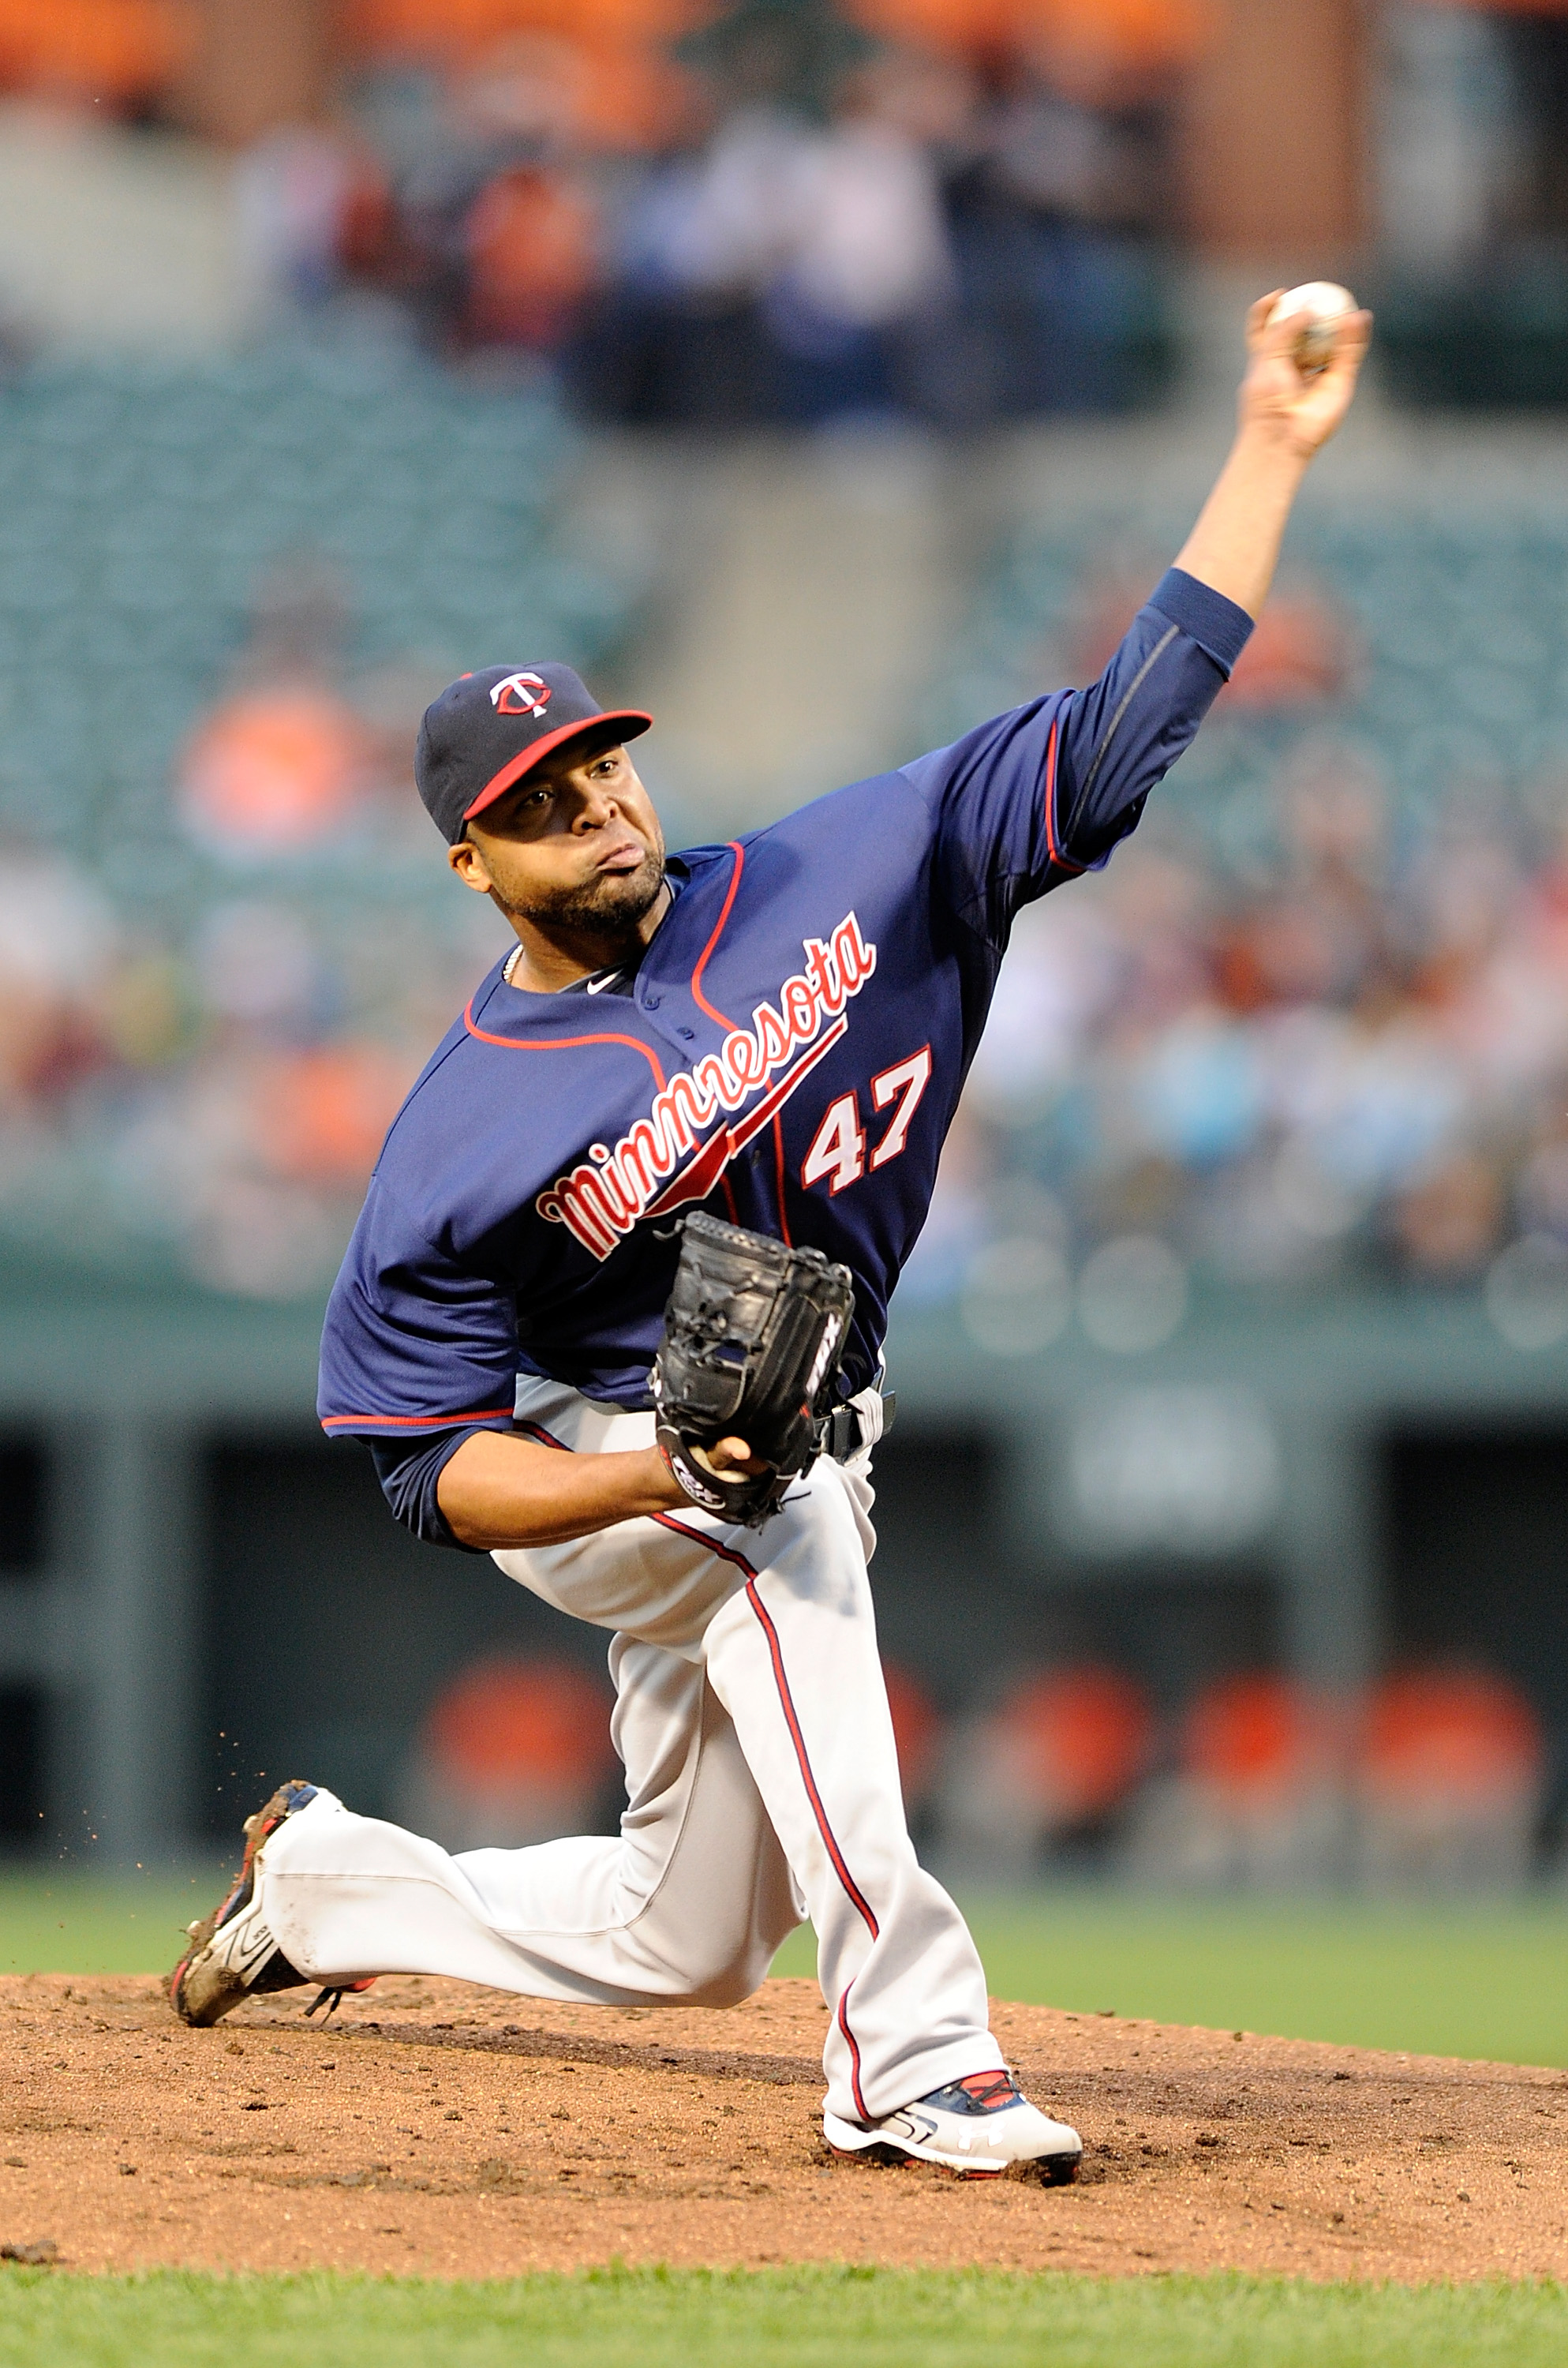 BALTIMORE, MD - APRIL 18:  Francisco Liriano #47 of the Minnesota Twins pitches against the Baltimore Orioles at Oriole Park at Camden Yards on April 18, 2011 in Baltimore, Maryland.  (Photo by Greg Fiume/Getty Images)